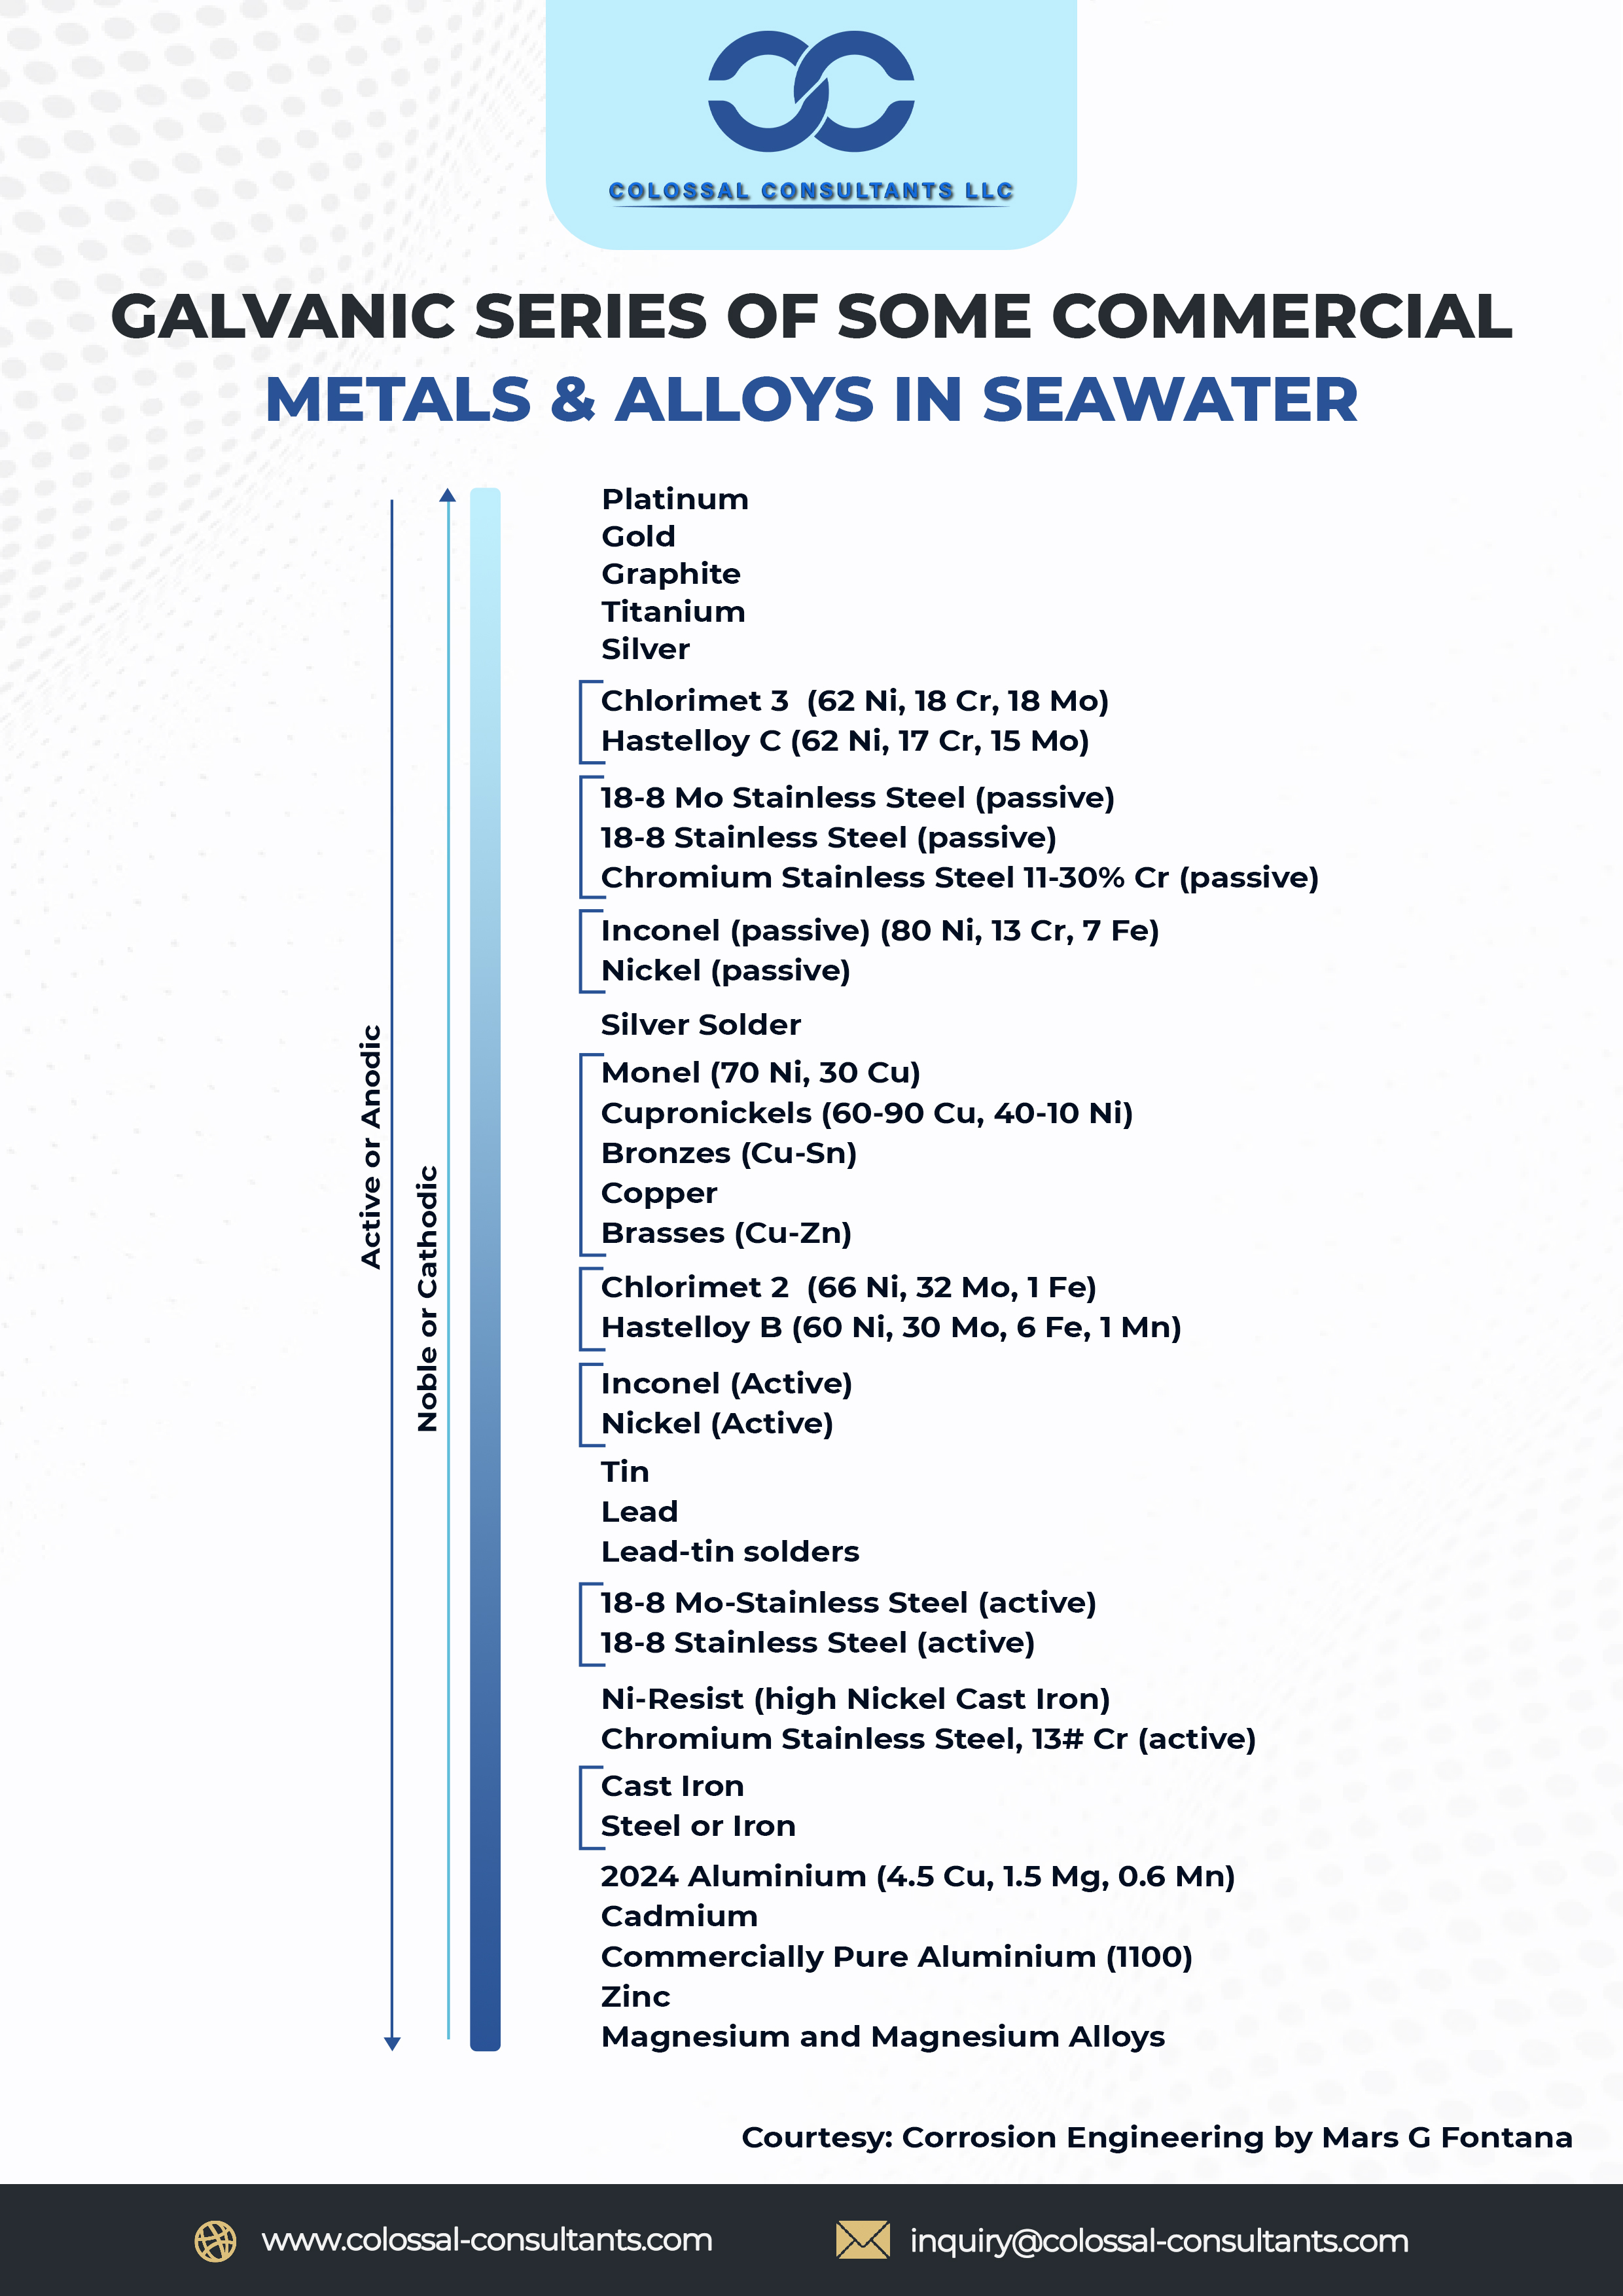 Colossal Consultants LLC - Latest update - Galvanic Series of some commercial Metals and Alloys in Seawater